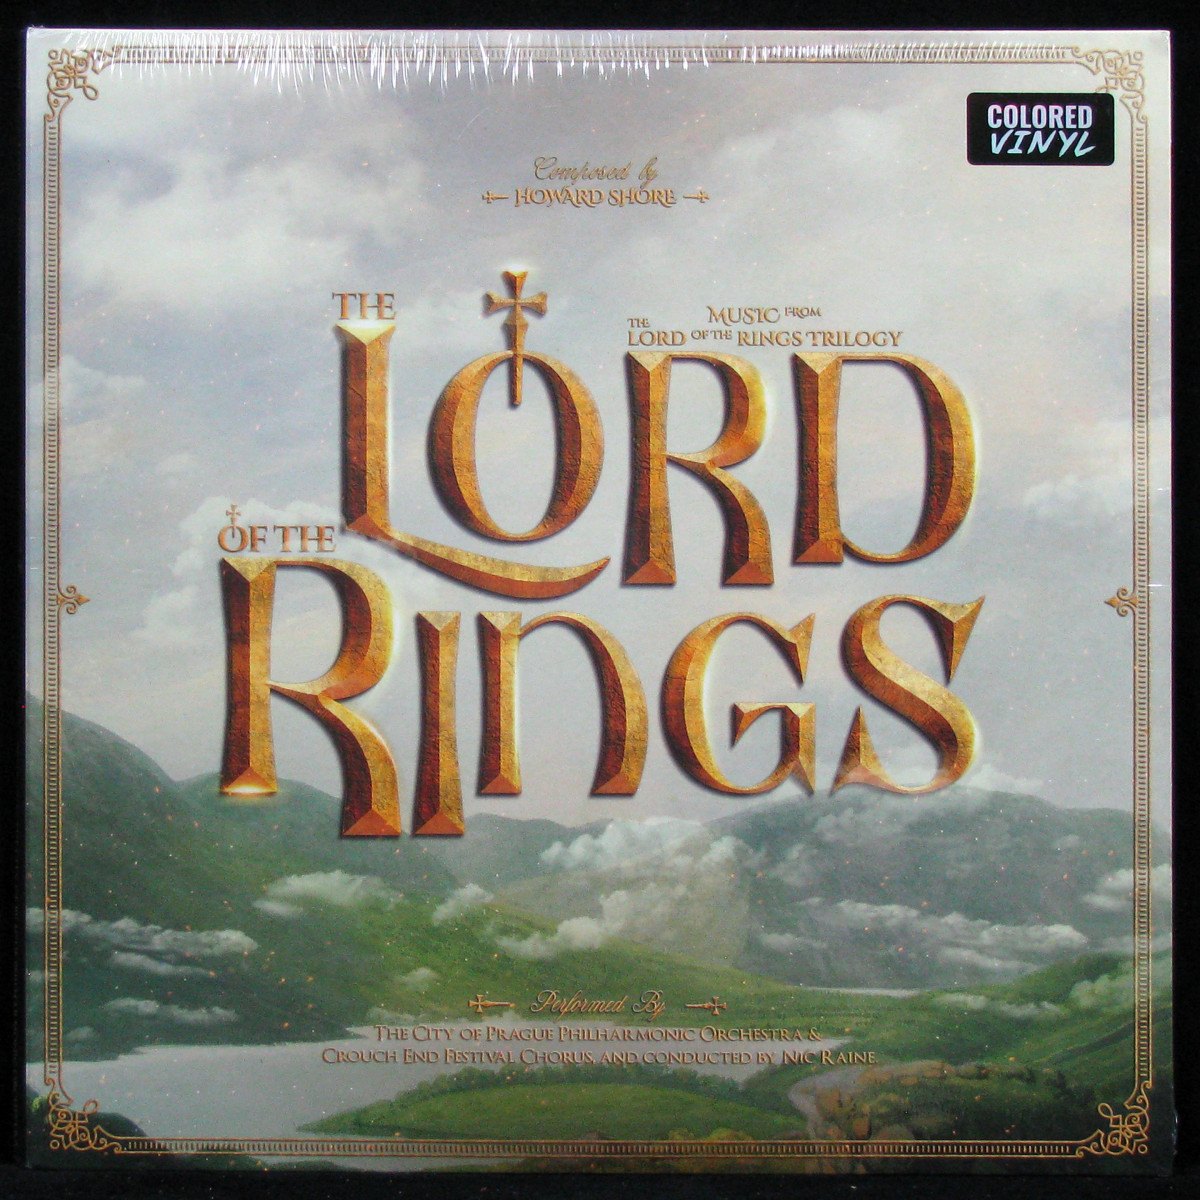 LP Nic Raine / City Of Prague Philharmonic Orchestra — Music From The Lord Of The Rings Trilogy (3LP, coloured vinyl) фото